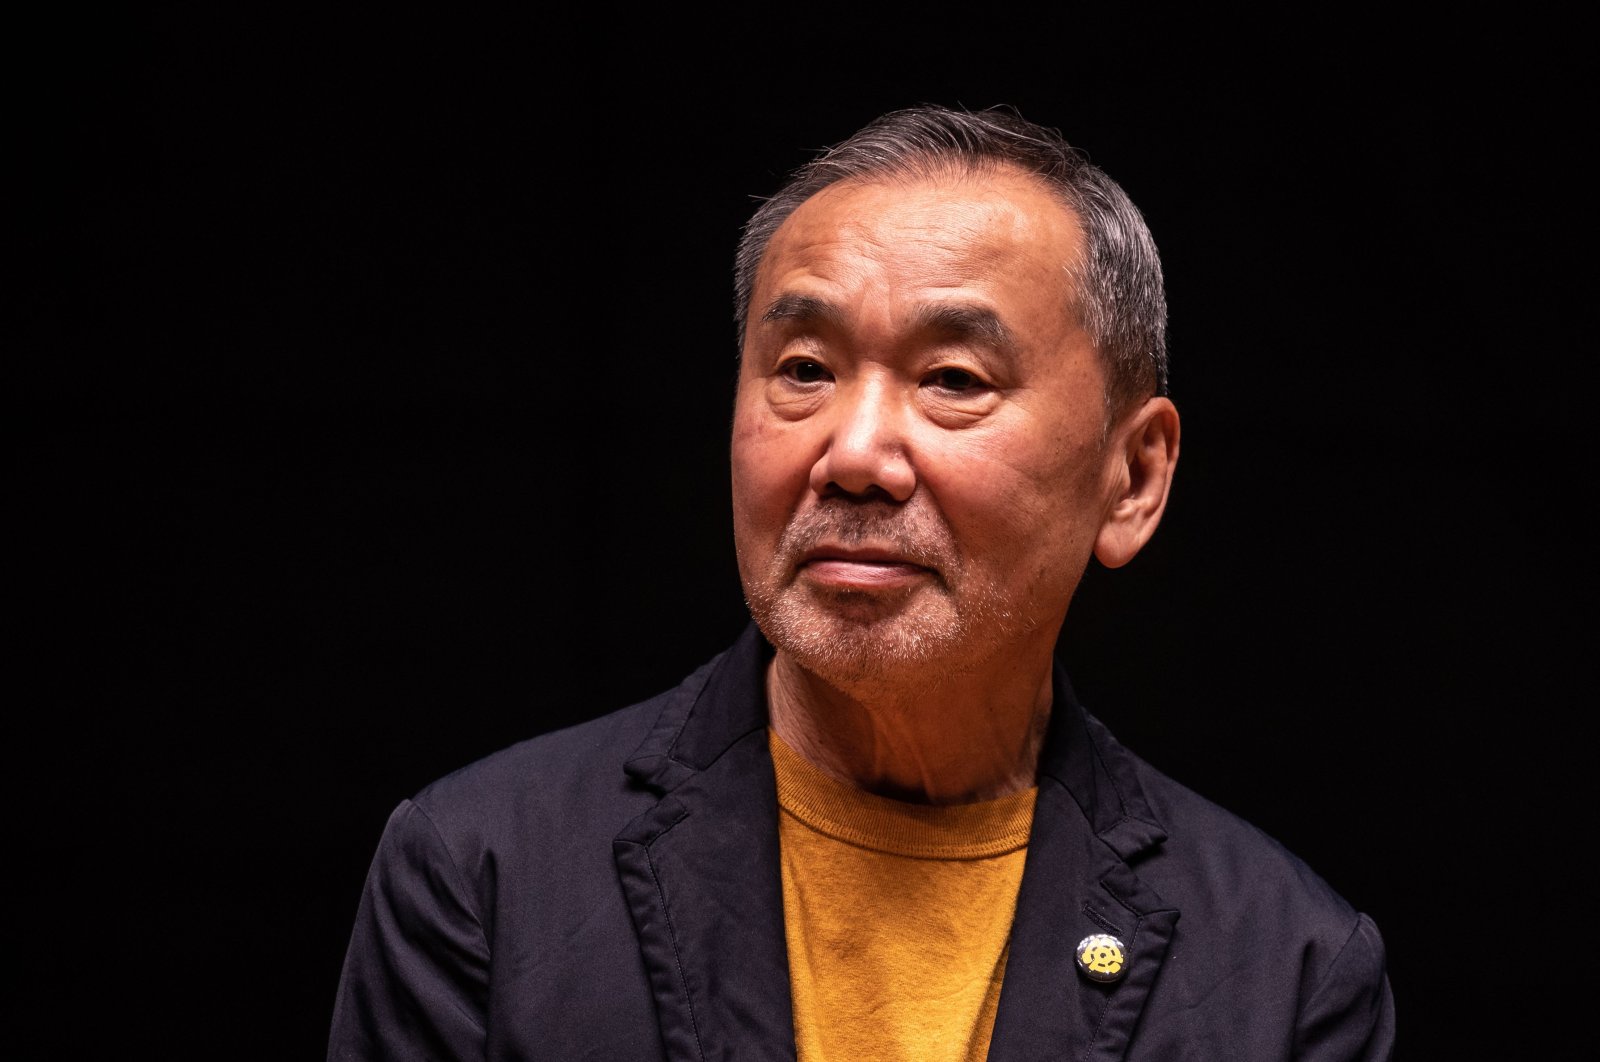 Japanese writer Haruki Murakami attends a press conference during a media preview of The Waseda International House of Literature, also known as Haruki Murakami Library, which is designed by Japanese architect Kengo Kuma, at Waseda University in Tokyo, Japan, Sept. 22, 2021. (AFP Photo)